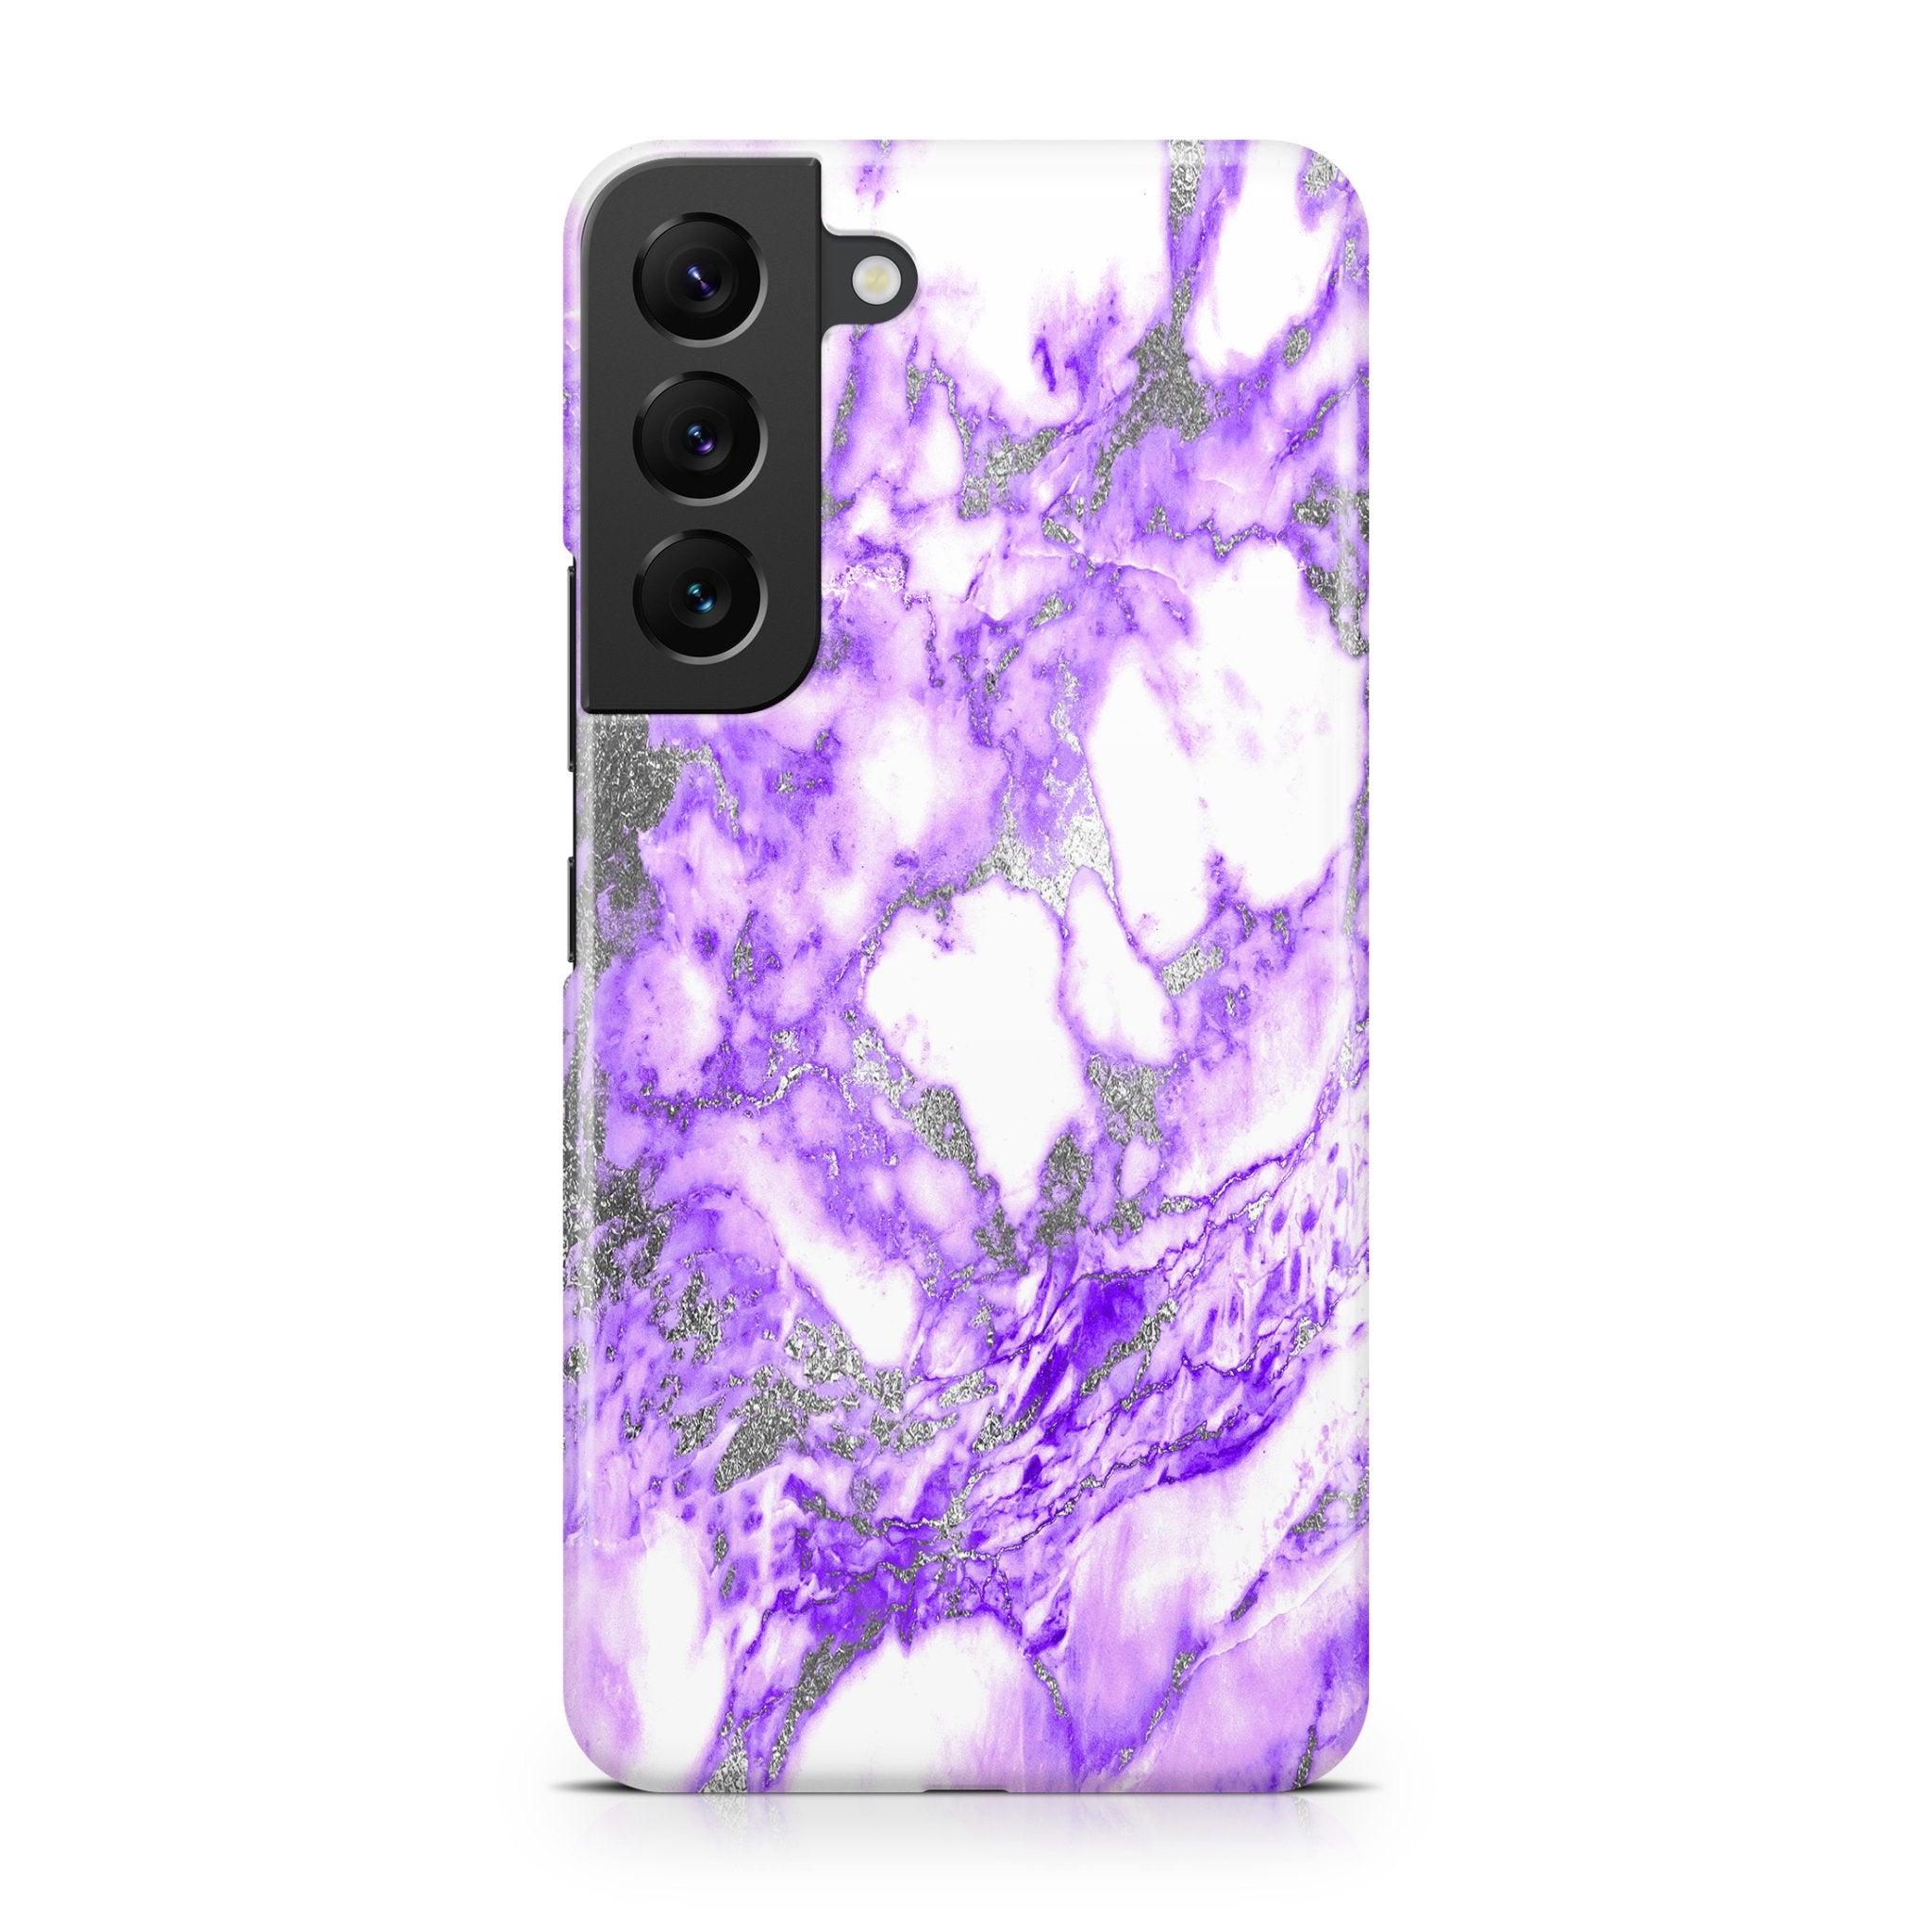 Purple & Silver Marble I - Samsung phone case designs by CaseSwagger